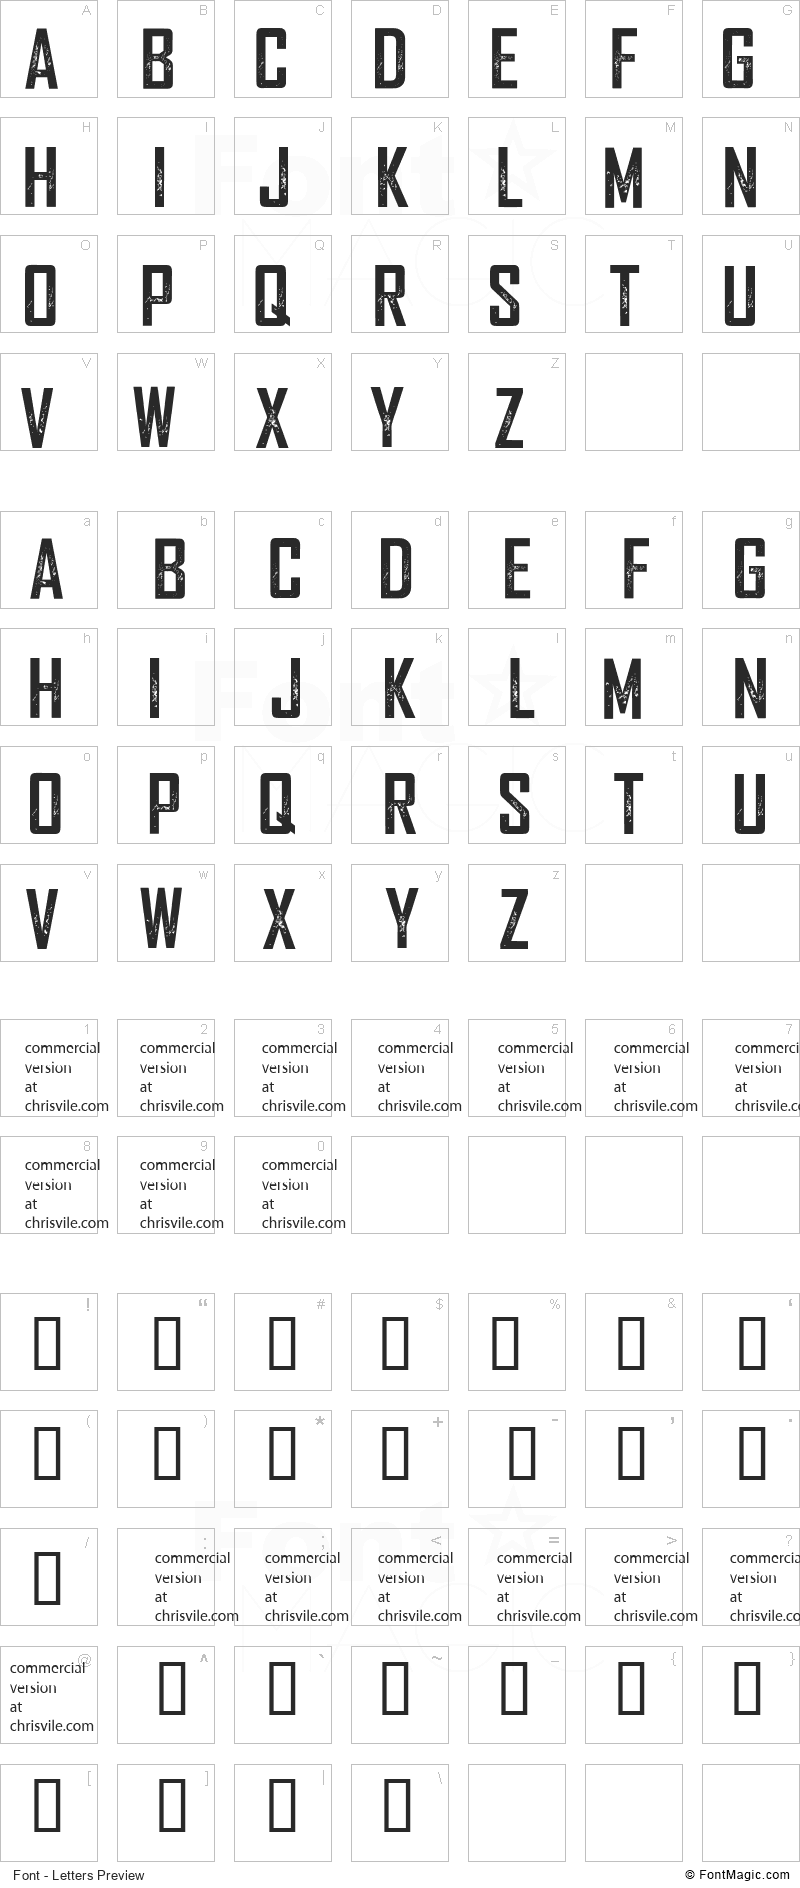 We are Depraved Font - All Latters Preview Chart